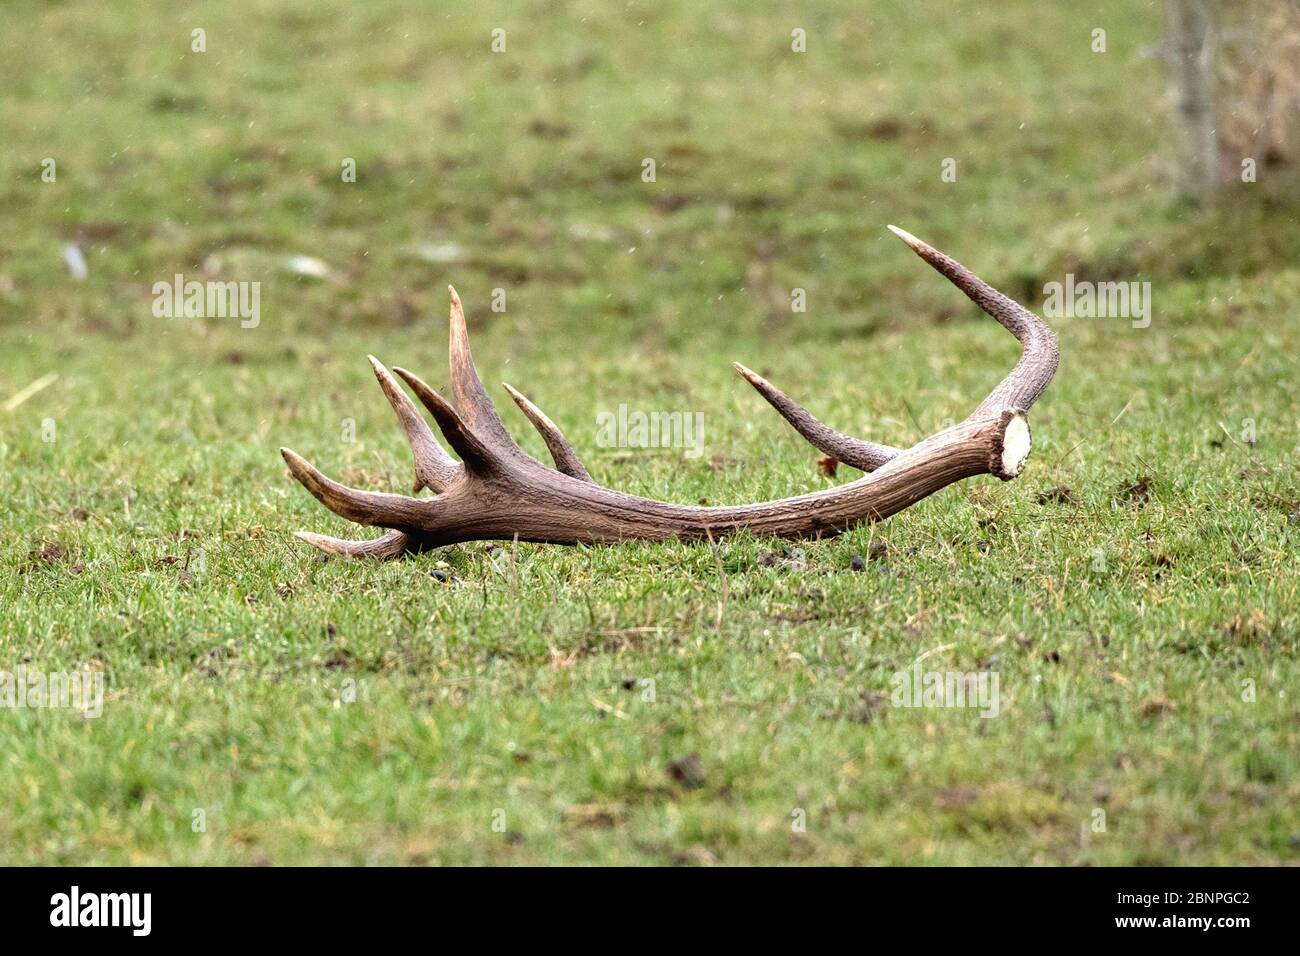 thrown antler stick of a red deer Stock Photo